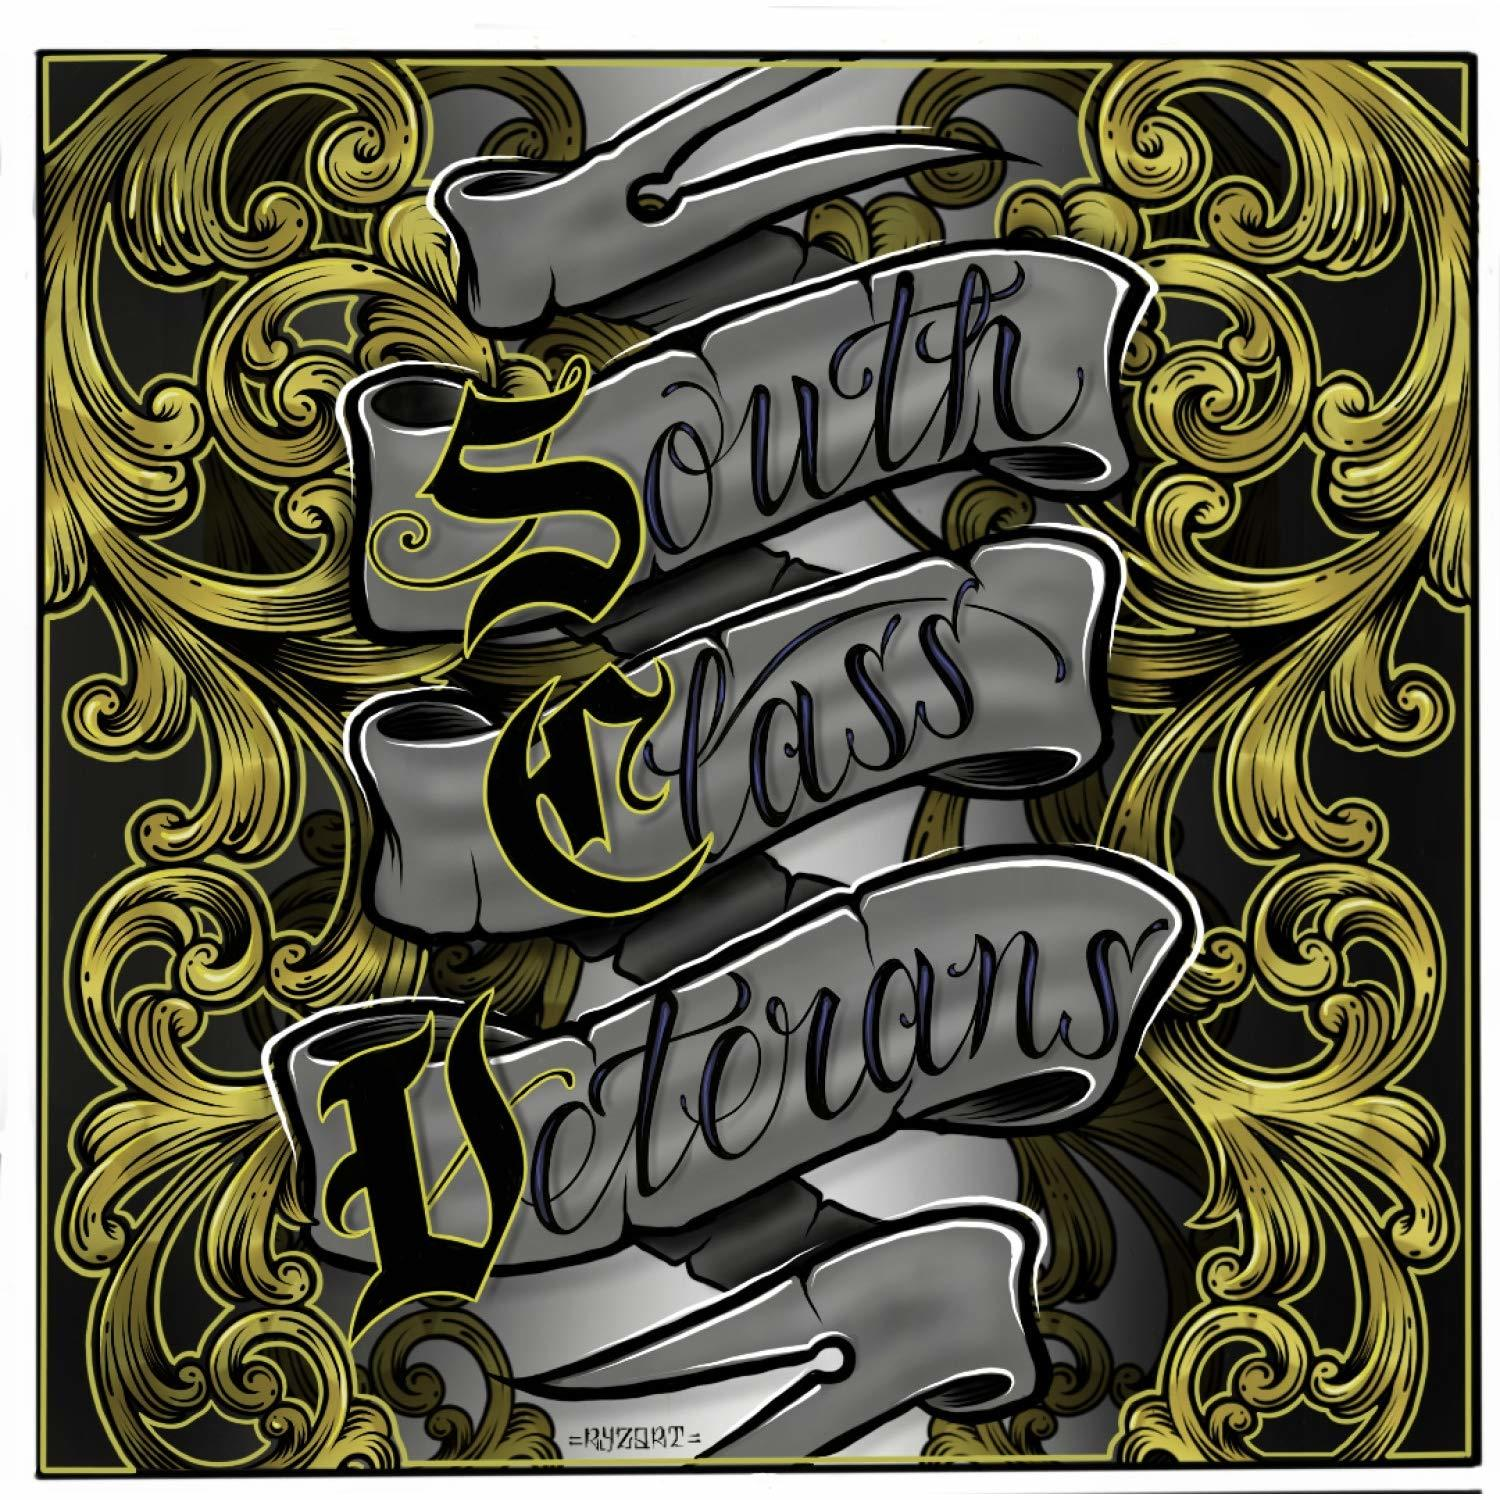 South Class Veterans To (CD) - Pay - Hell